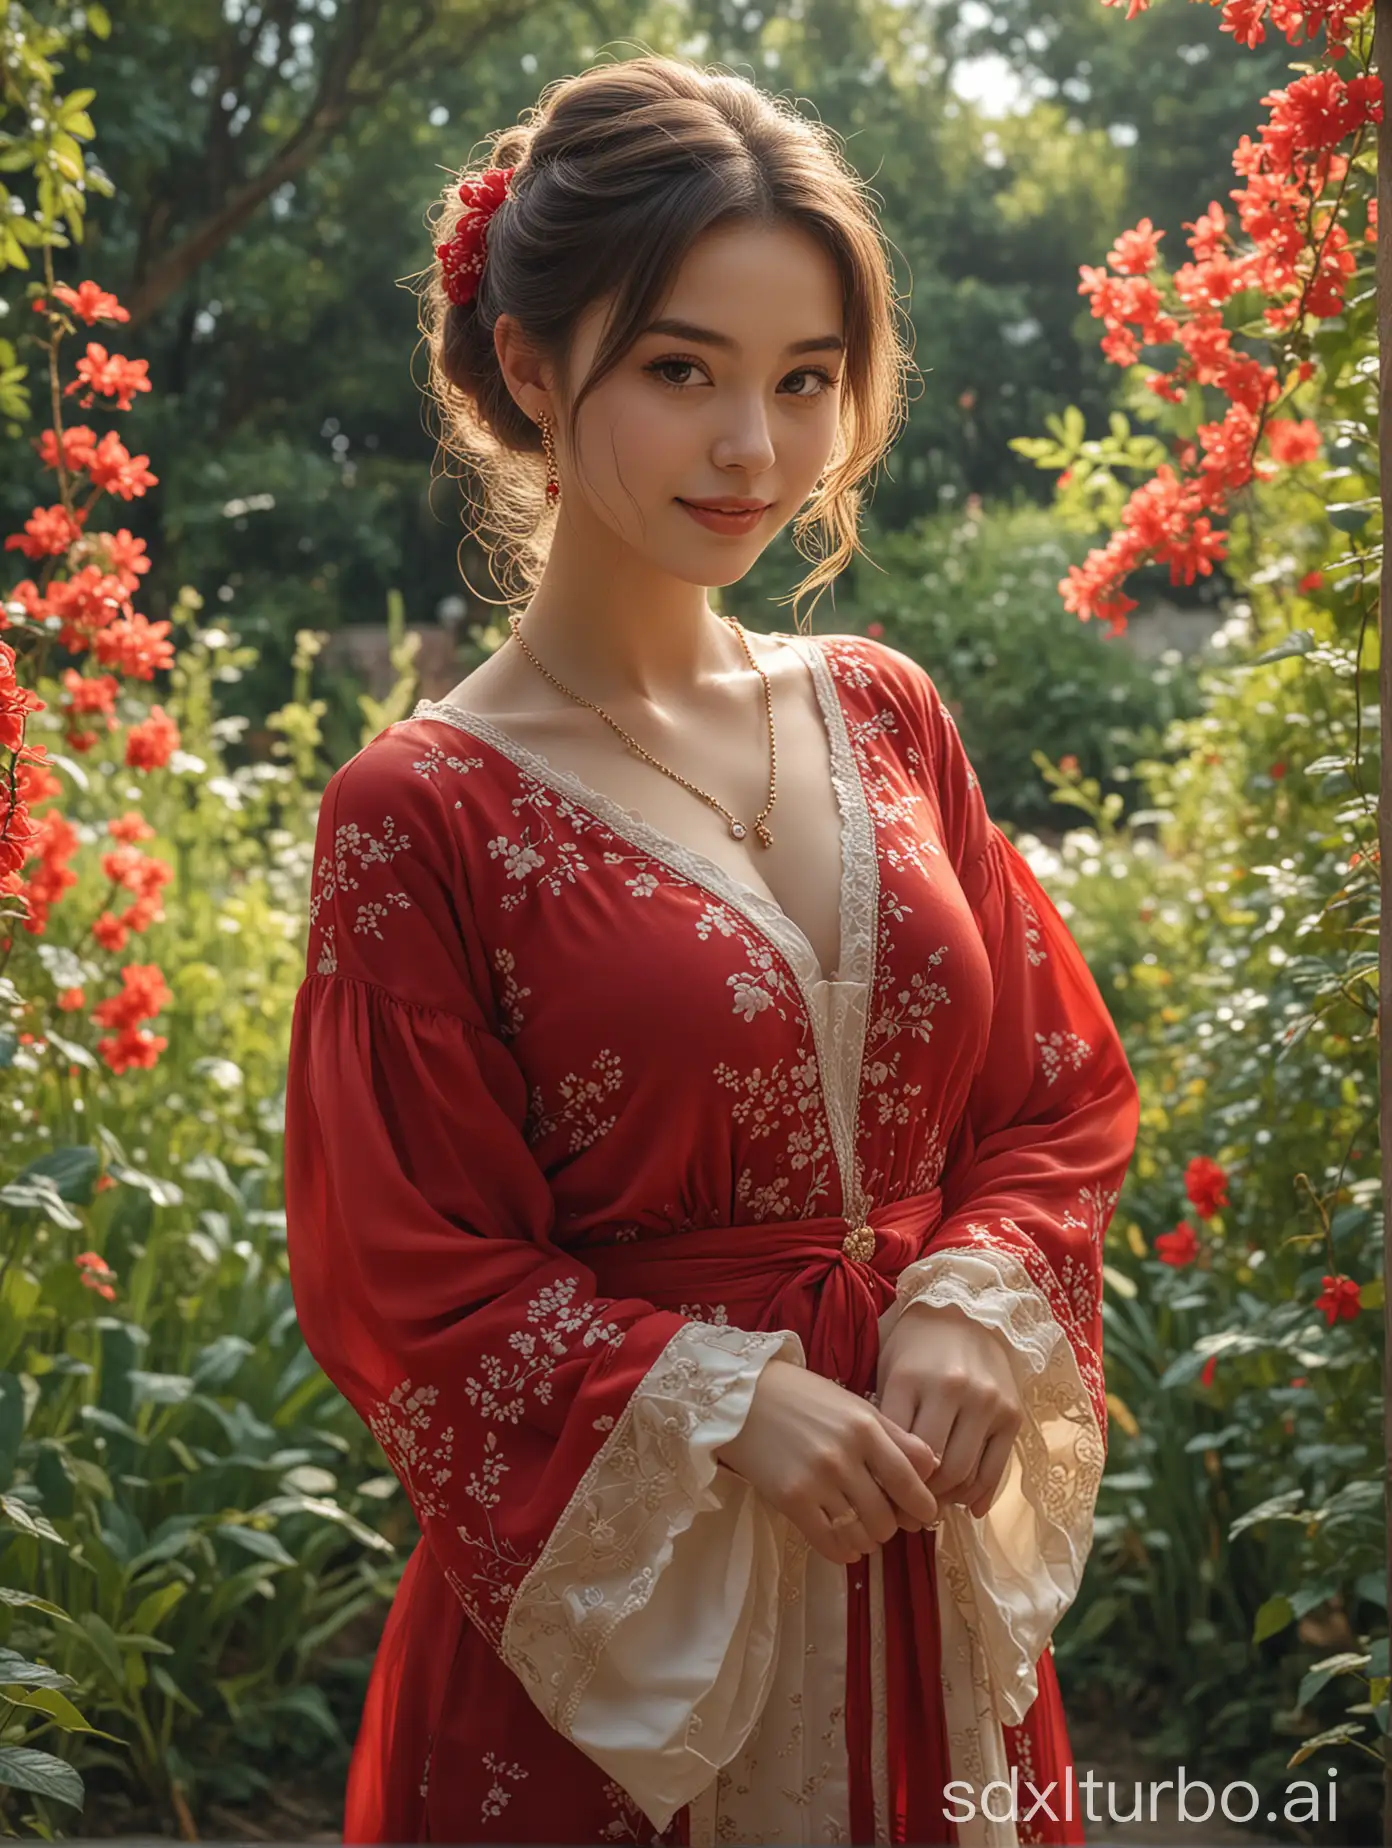 emb-melissatheuriau-v10-joysthokkins, a girl,  hanfu chiffon dress, red bikini, a necklace on her neck, victorian, intricate, masterpiece, best quality, highres, 4k, hdr, smile, puffy sleeves, in the garden
masterpiece, best quality, <lora:backlight_slider_v10:-1.5>, <lora:contrast_slider_v10:2>